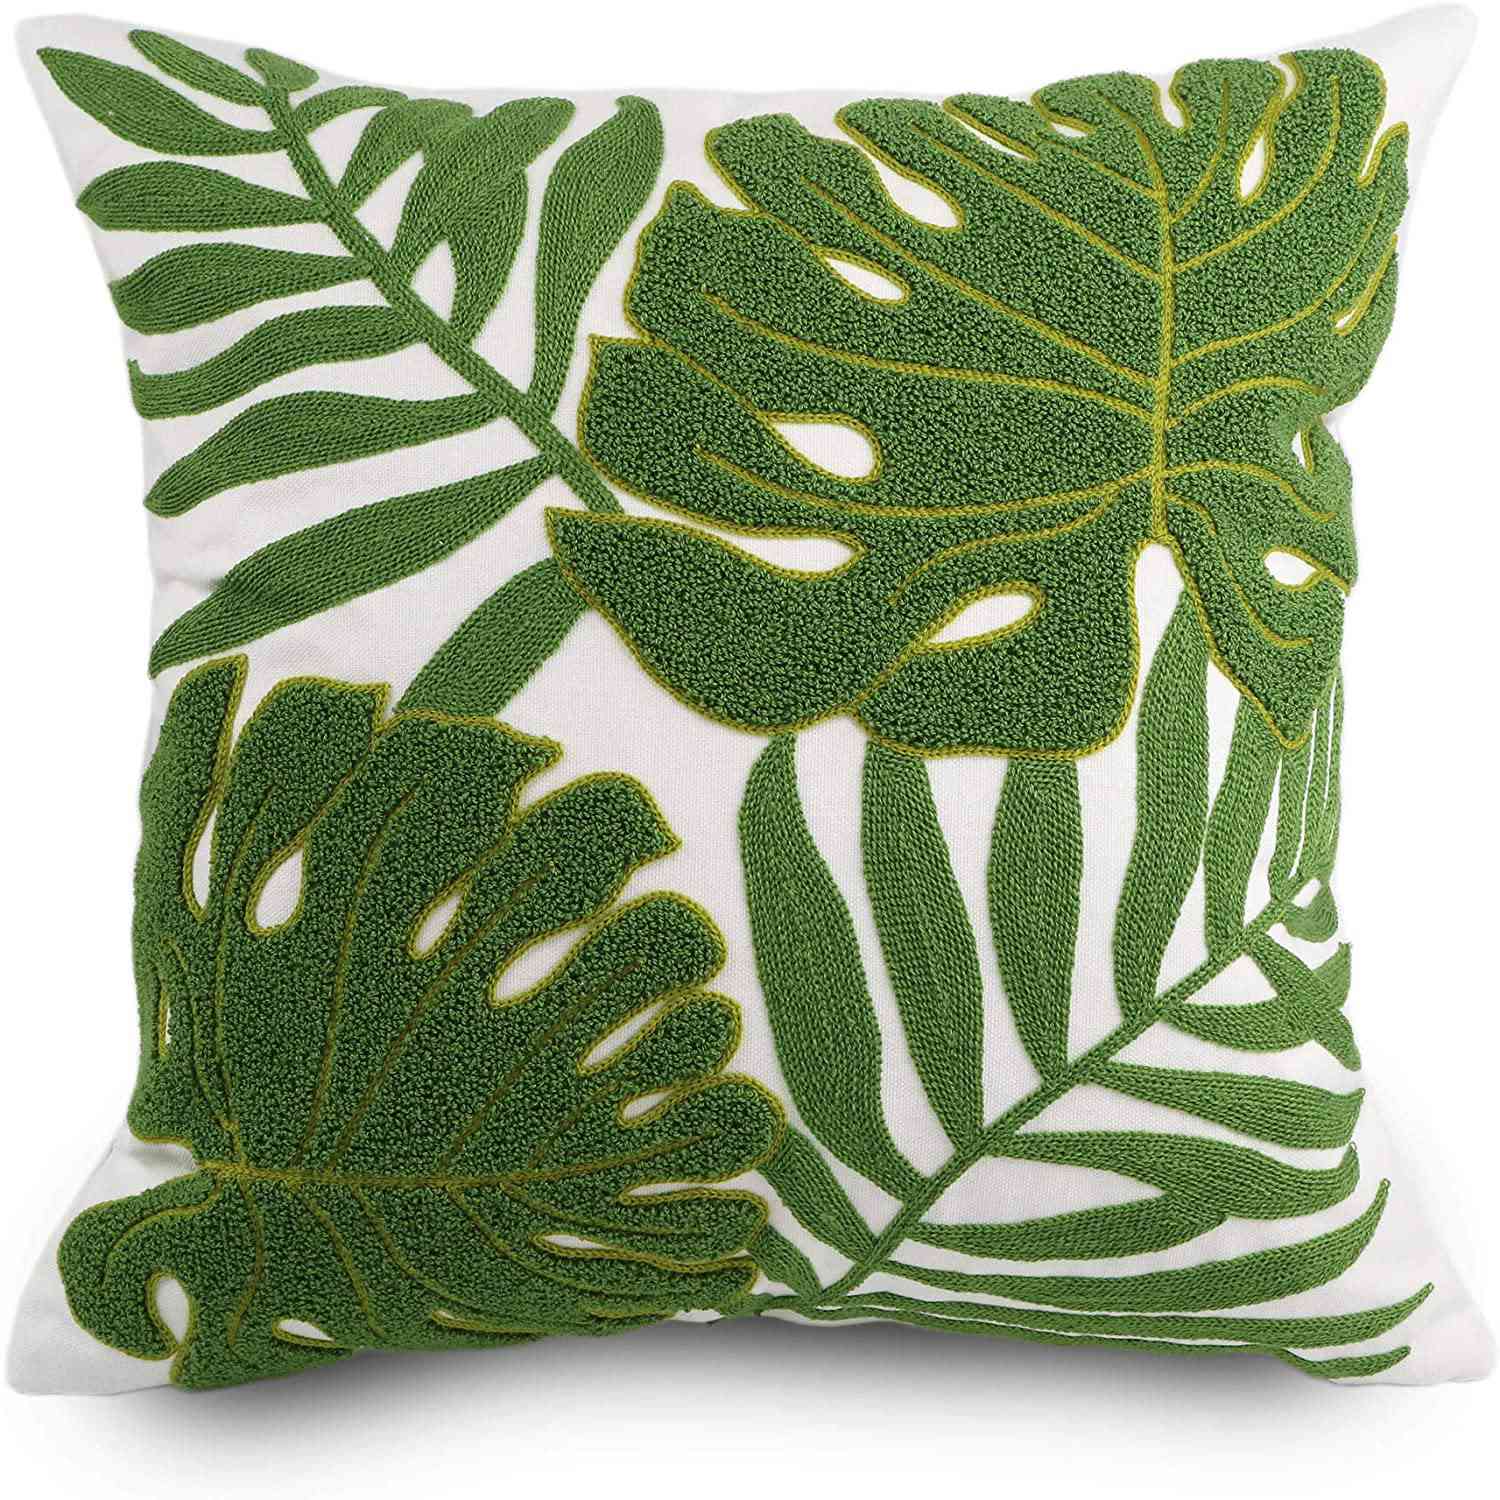 Hodeco Decorative Throw Pillow Covers 18x18 Tropical Green Leaves Embroidery